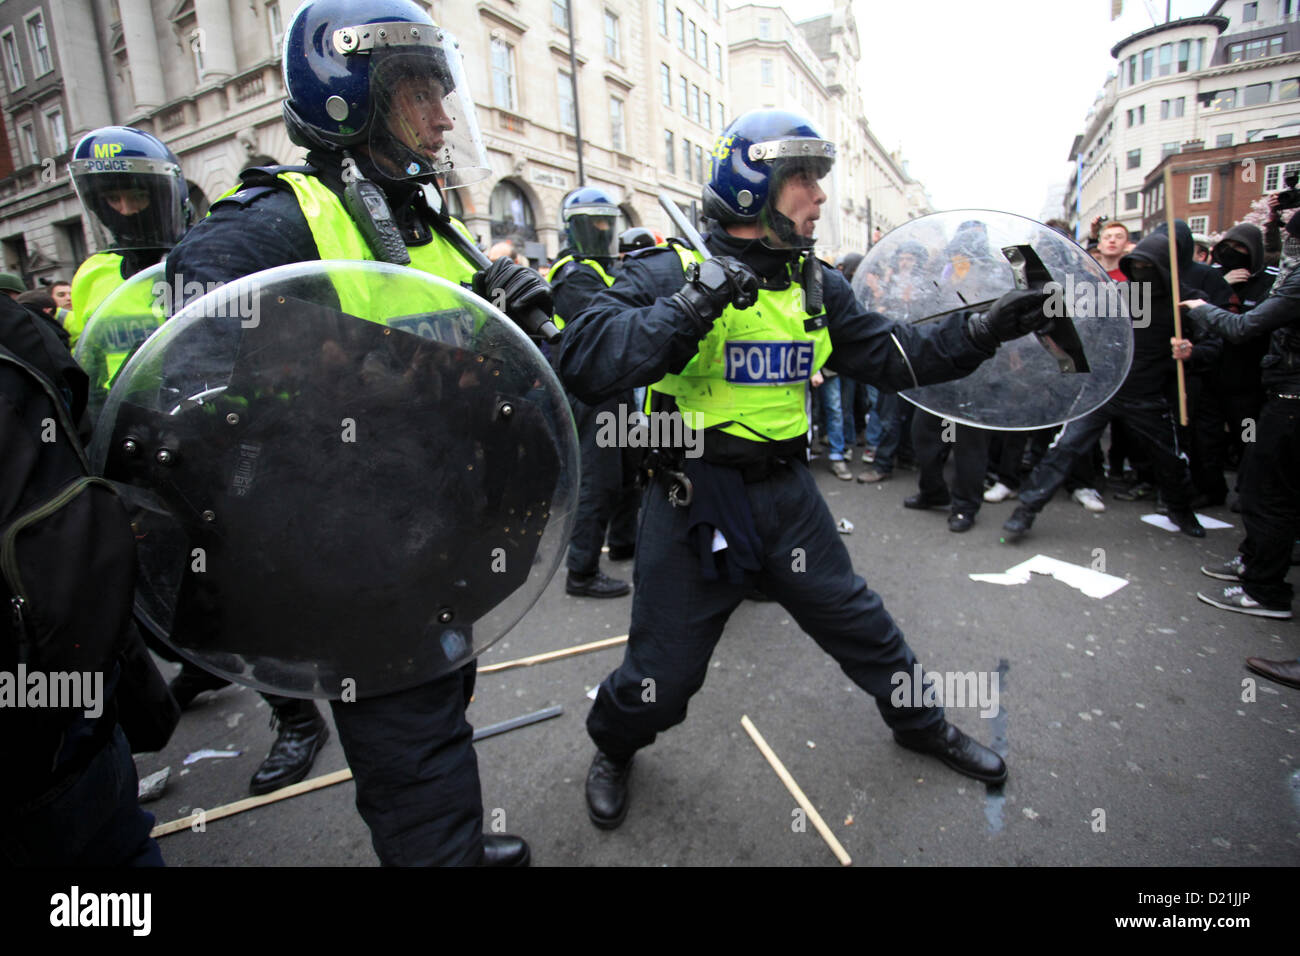 Anti riot police during demonstration in London Stock Photo